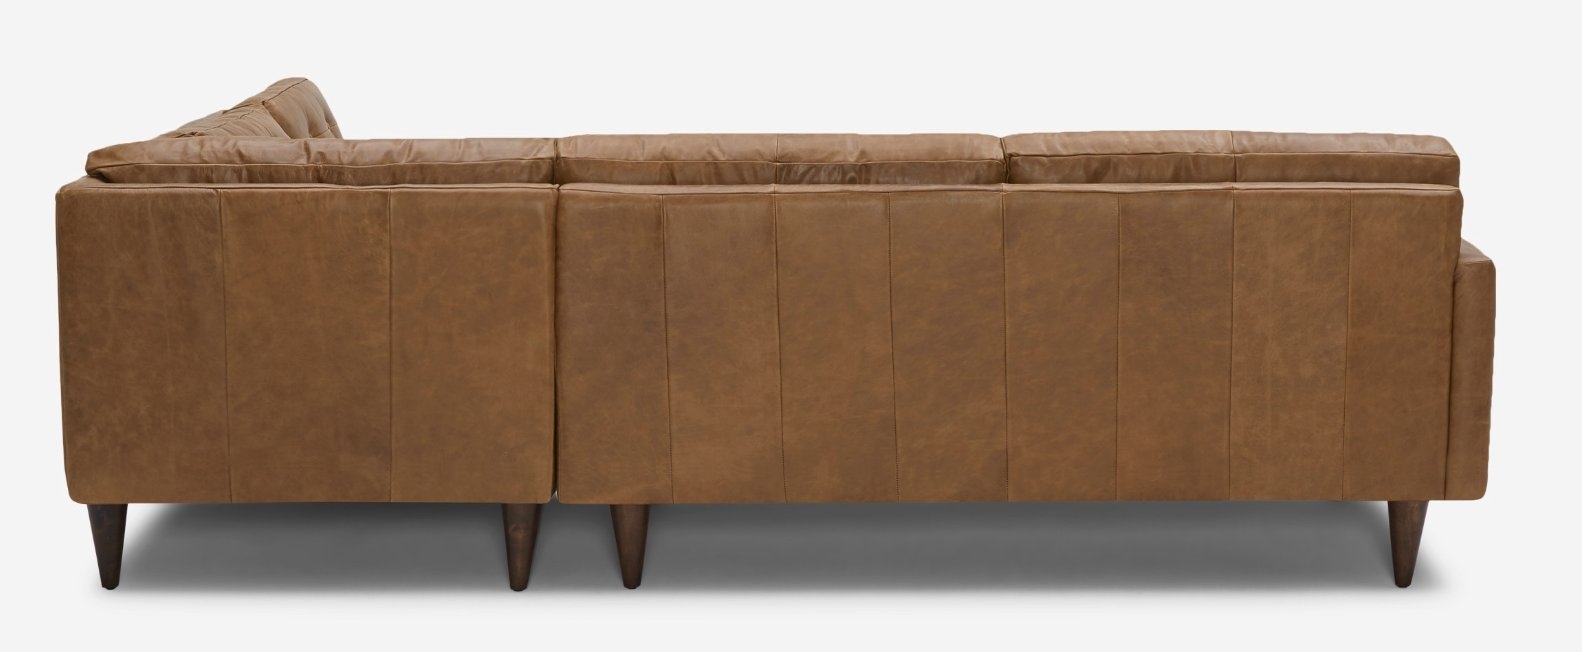 Eliot Leather Sectional with Bumper - Right Arm Orientation - in Santiago Ale with Mocha Wood Stain - Image 3